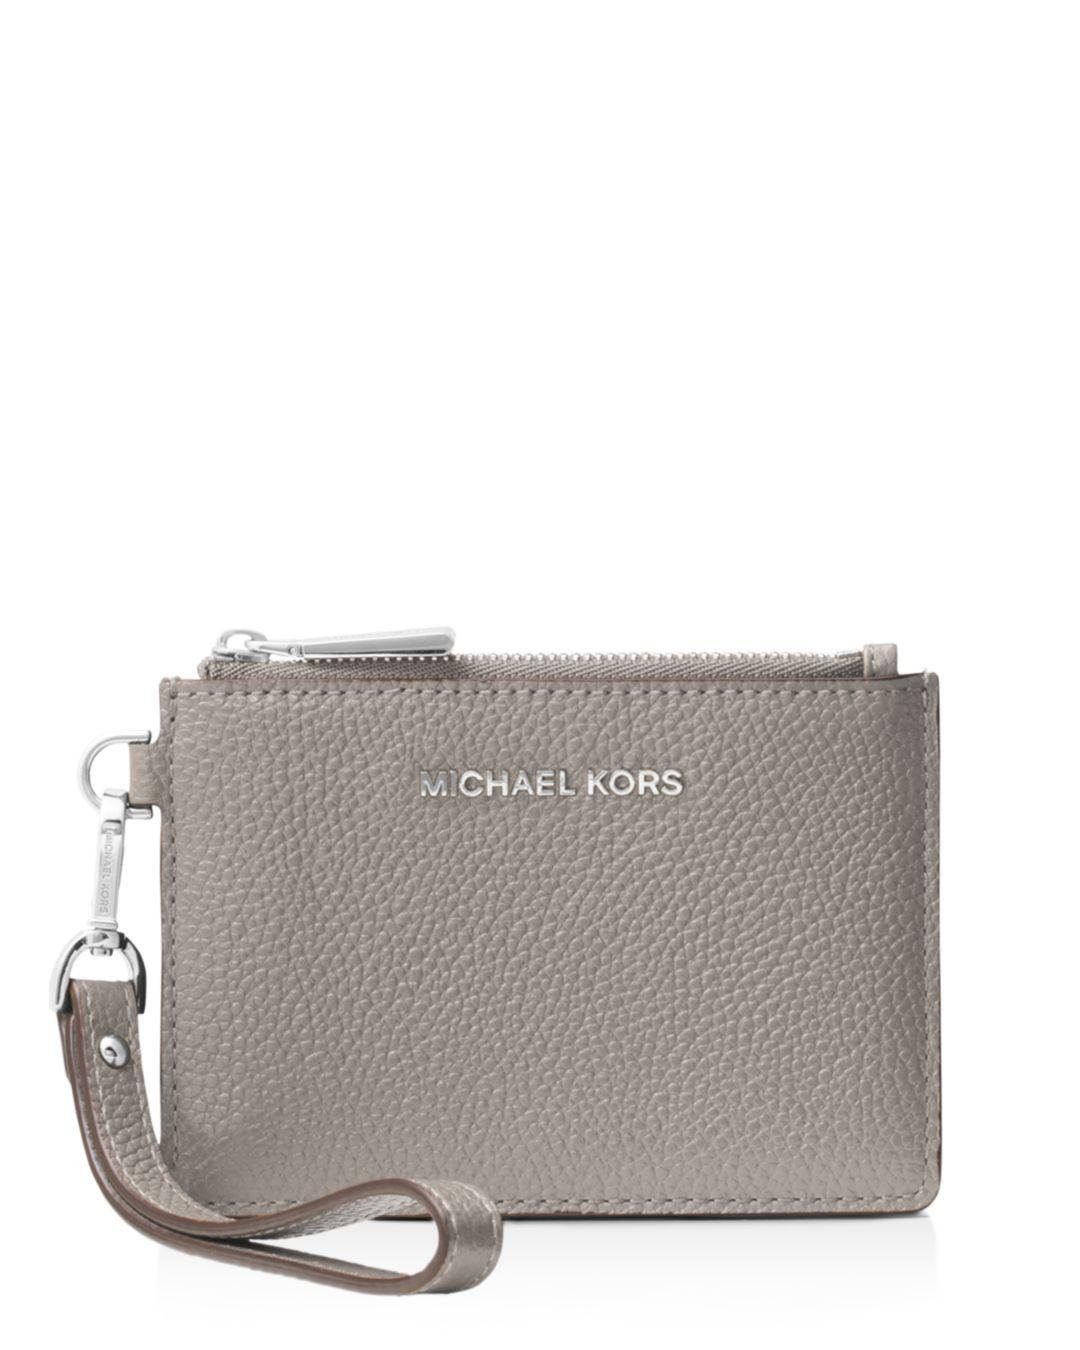 MICHAEL Michael Kors Leather Small Coin Purse in Pearl Gray/Silver (Gray) - Lyst